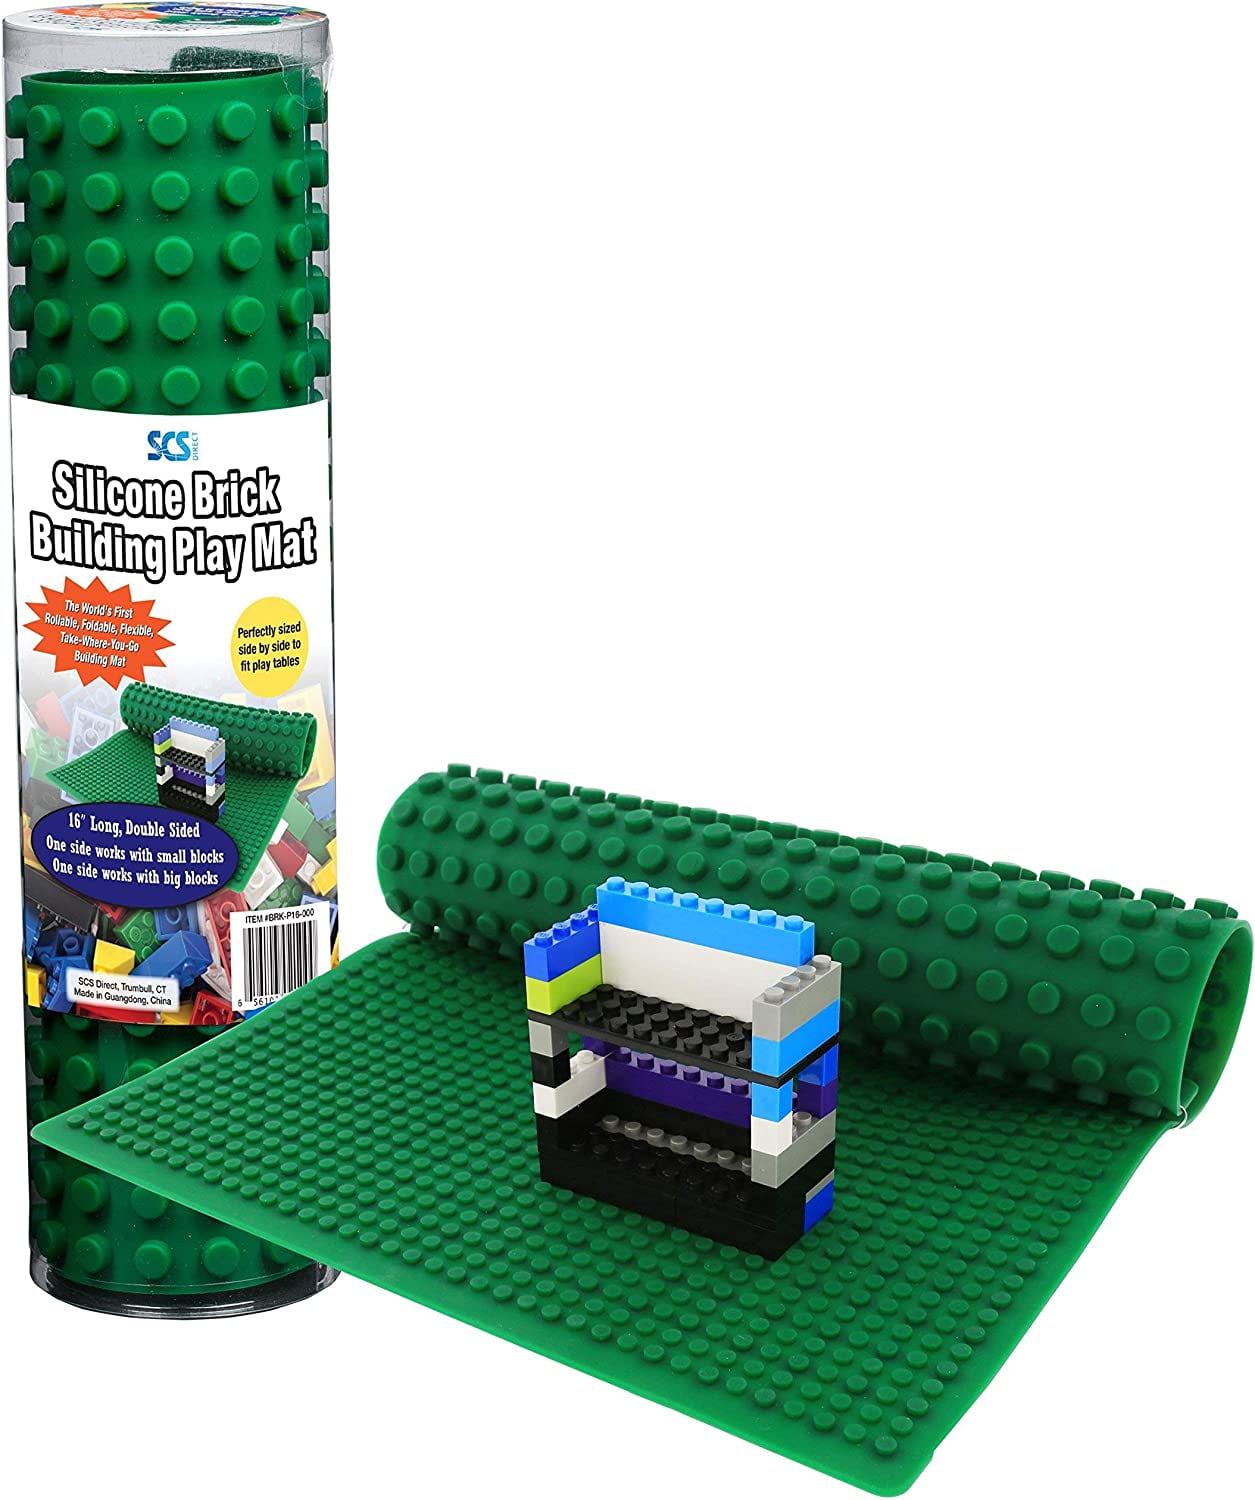 Brick Building Play Mat - 16 Rollable, Portable Two Sided Silicone Mat